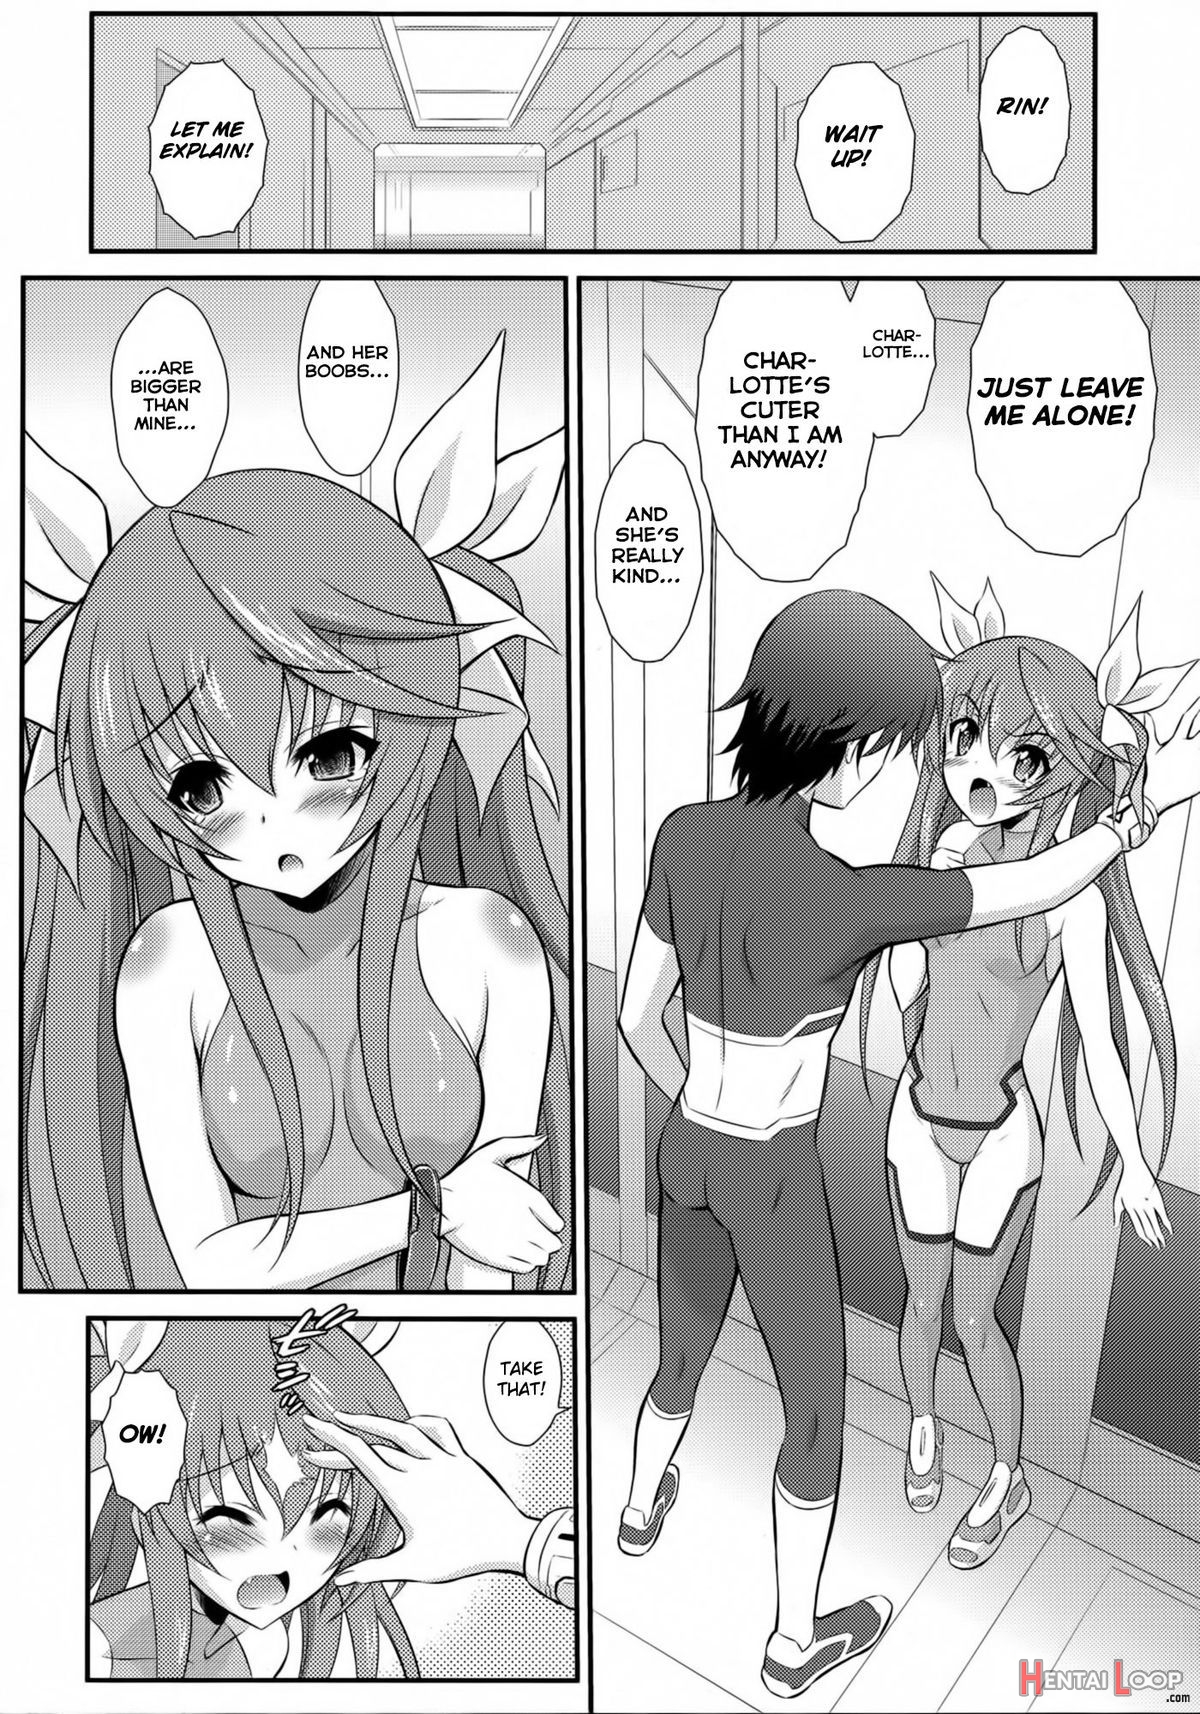 The Second Childhood Friend Has Small, Sensitive Breasts! page 8